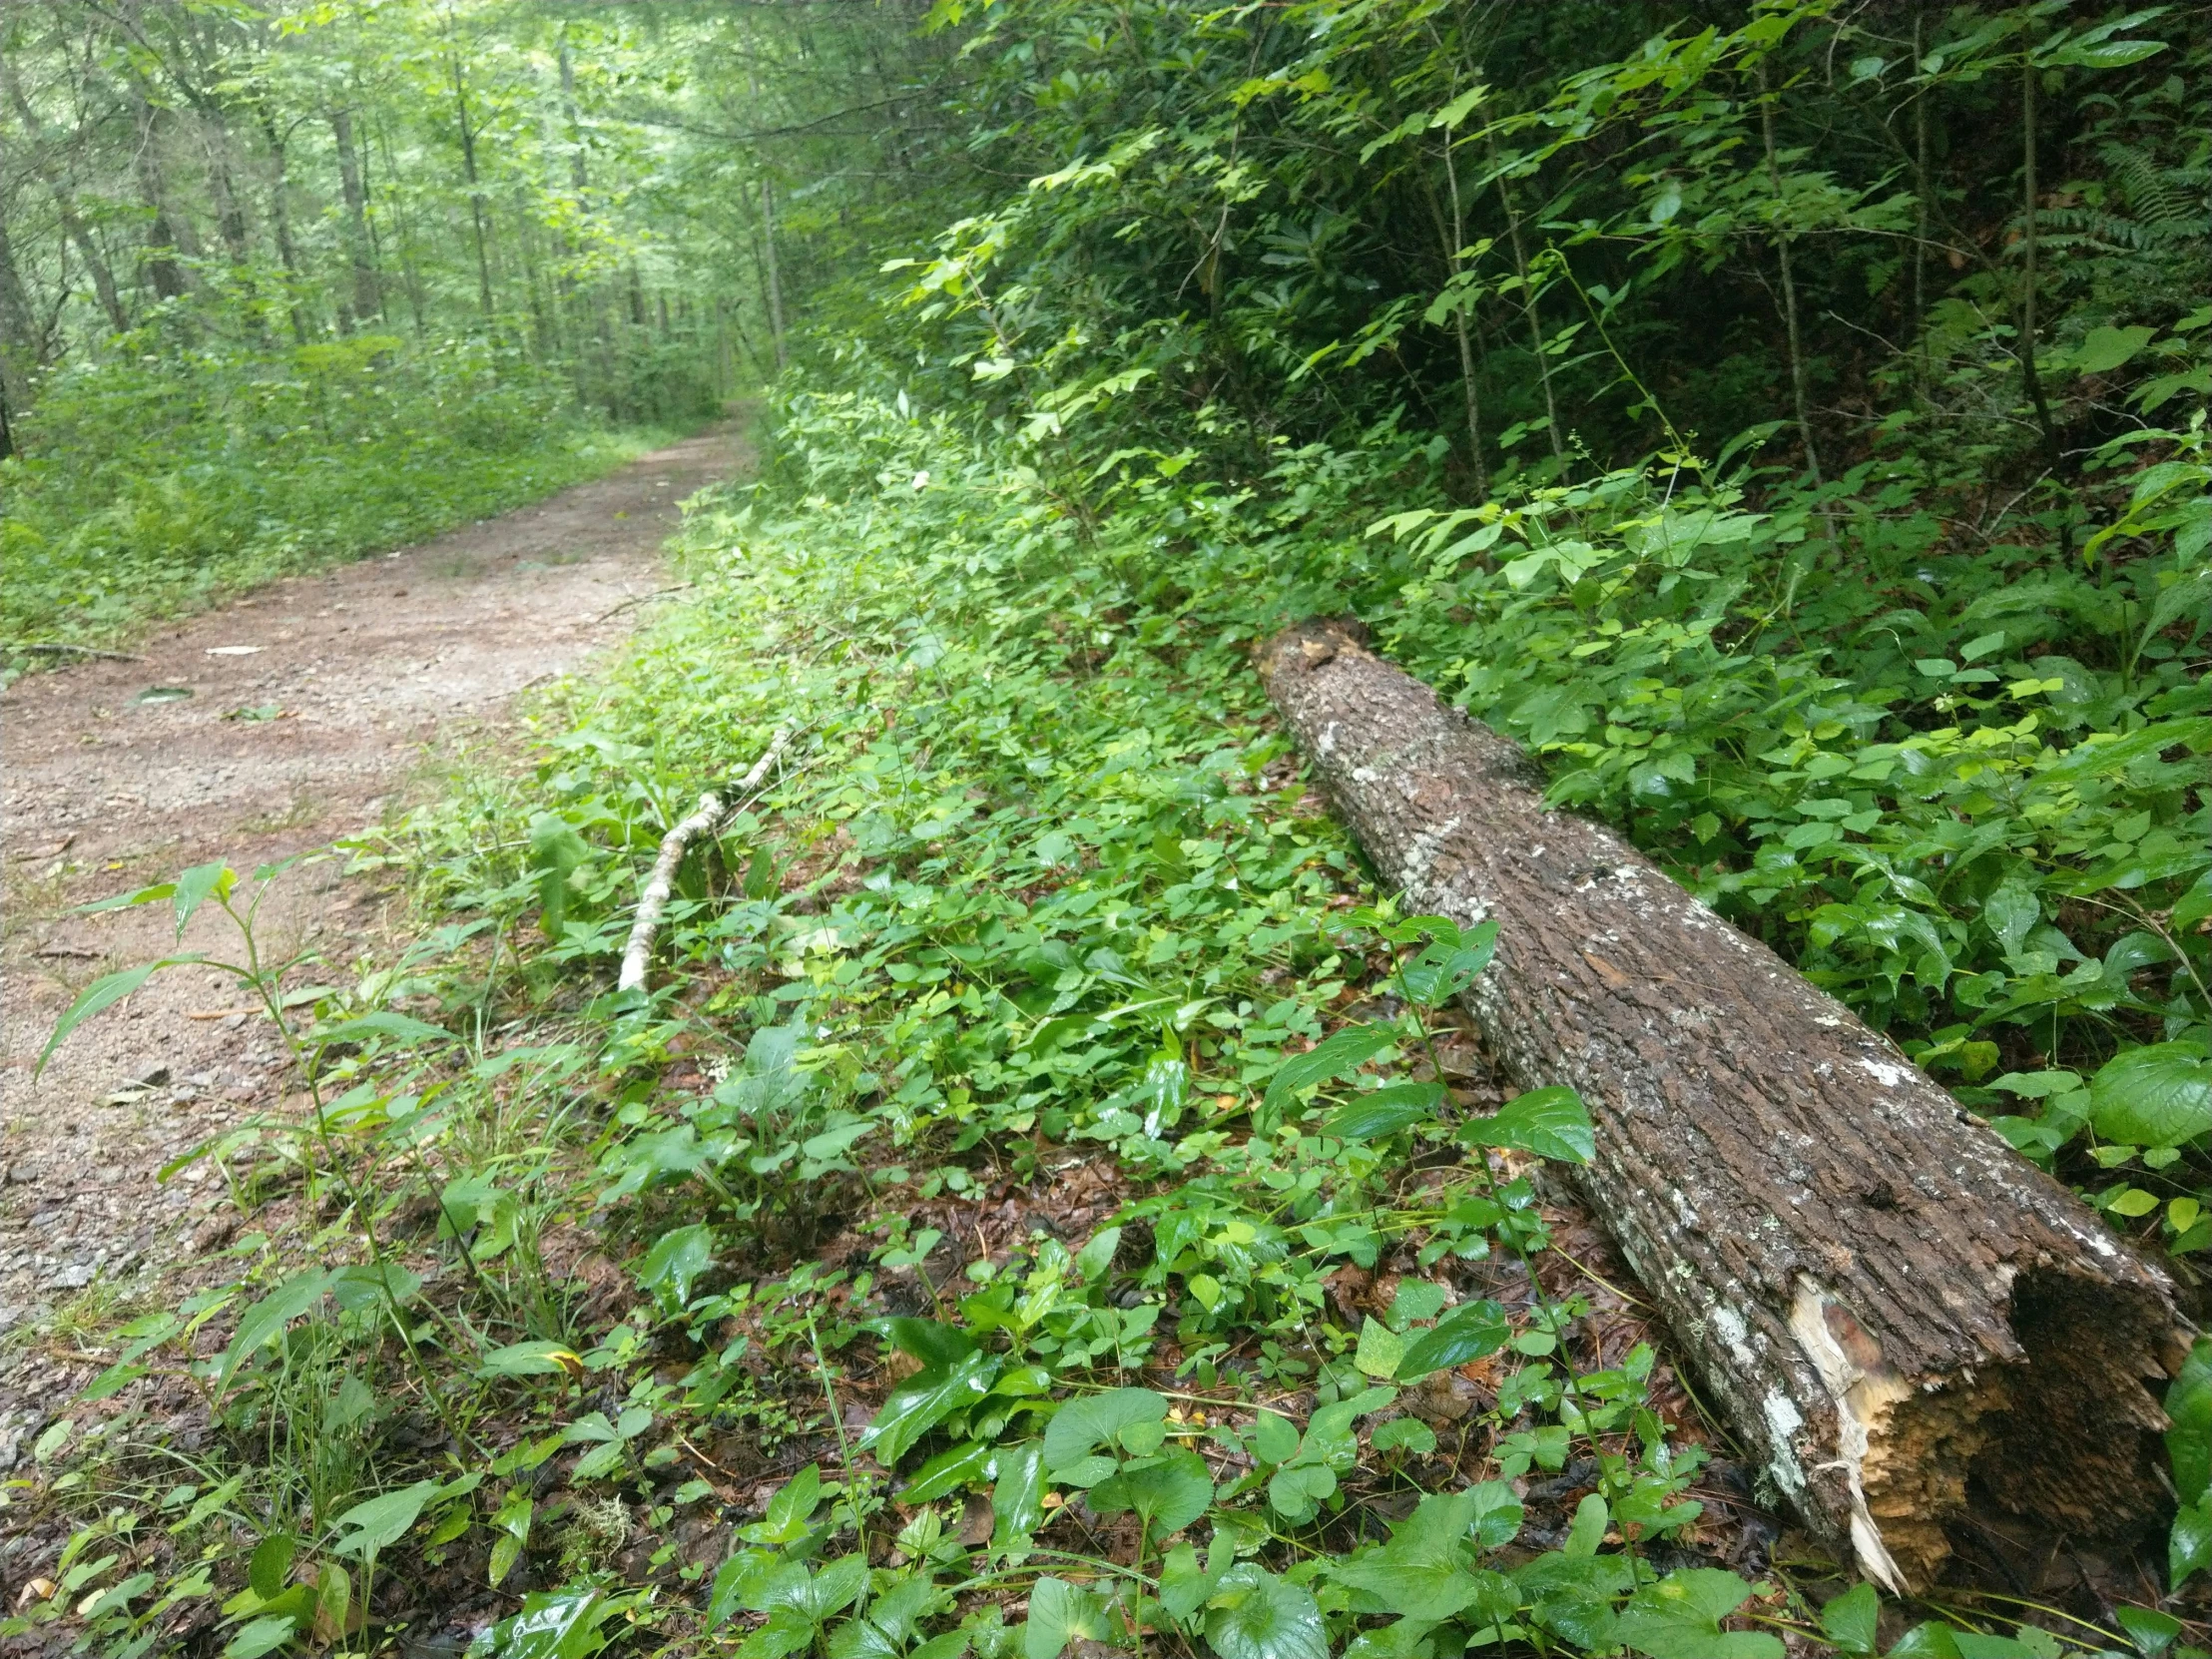 this log is on the side of the dirt road